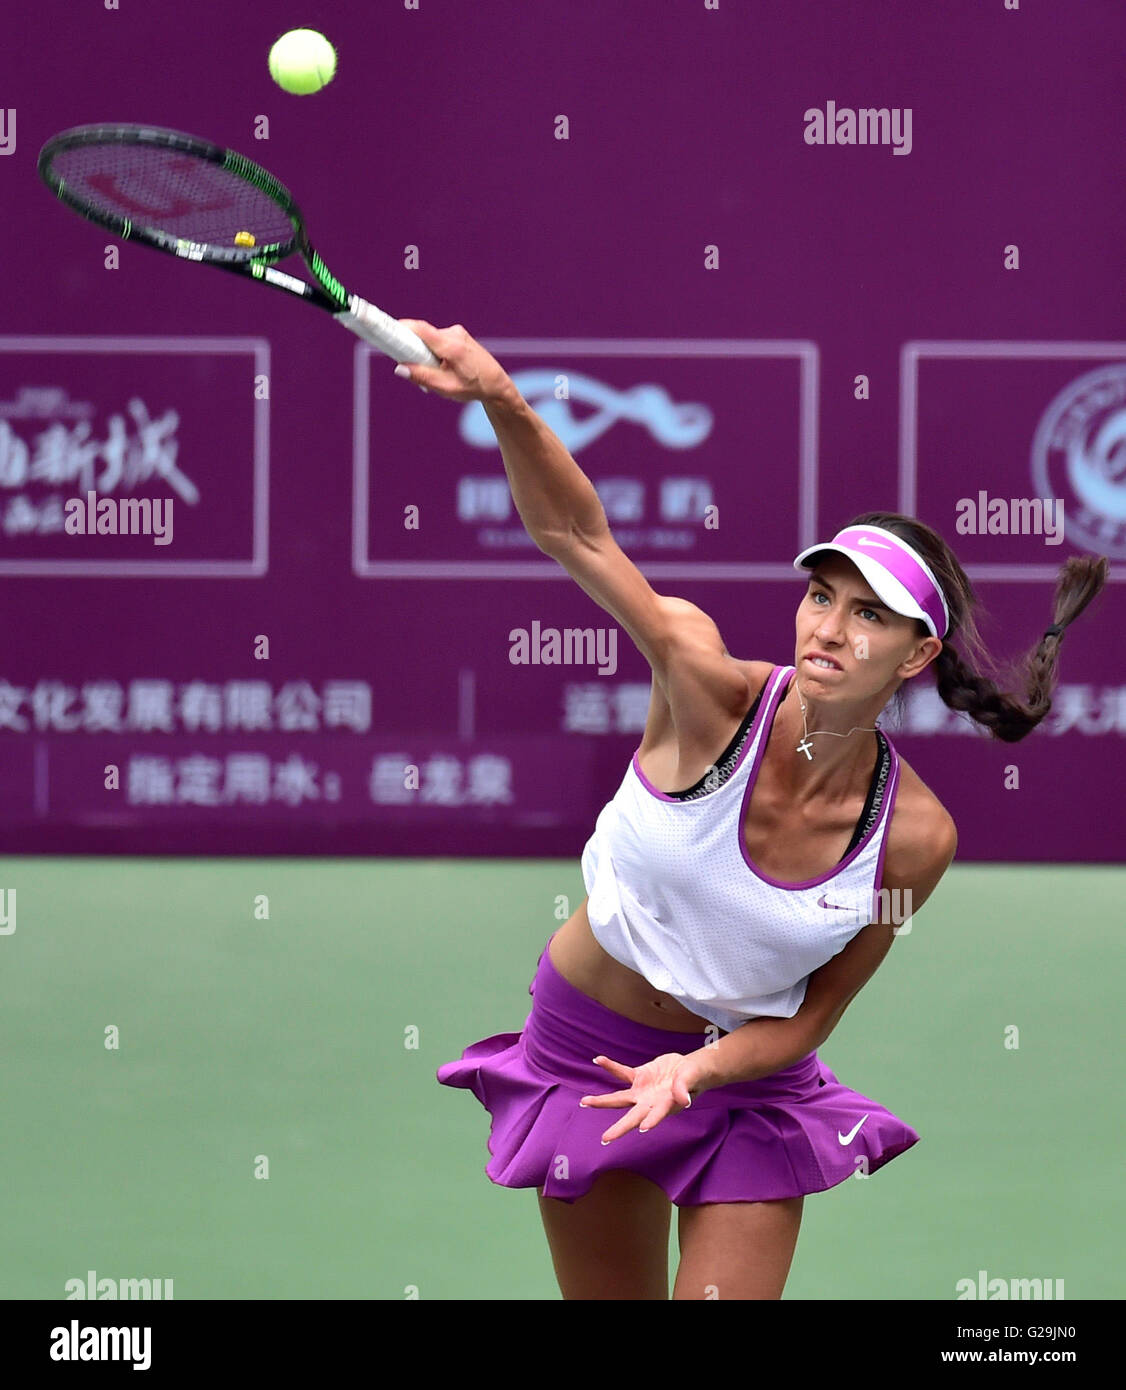 Tianjin. 27th May, 2016. Anastasia Pivovarova of Russia serves during the singles' quarterfinal against Liu Fangzhou of China in 2016 ITF Women's Circuit in north China's Tianjin Municipality, on May 27, 2016. Anastasia Pivovarova retired in the second set. Credit:  Yue Yuewei/Xinhua/Alamy Live News Stock Photo